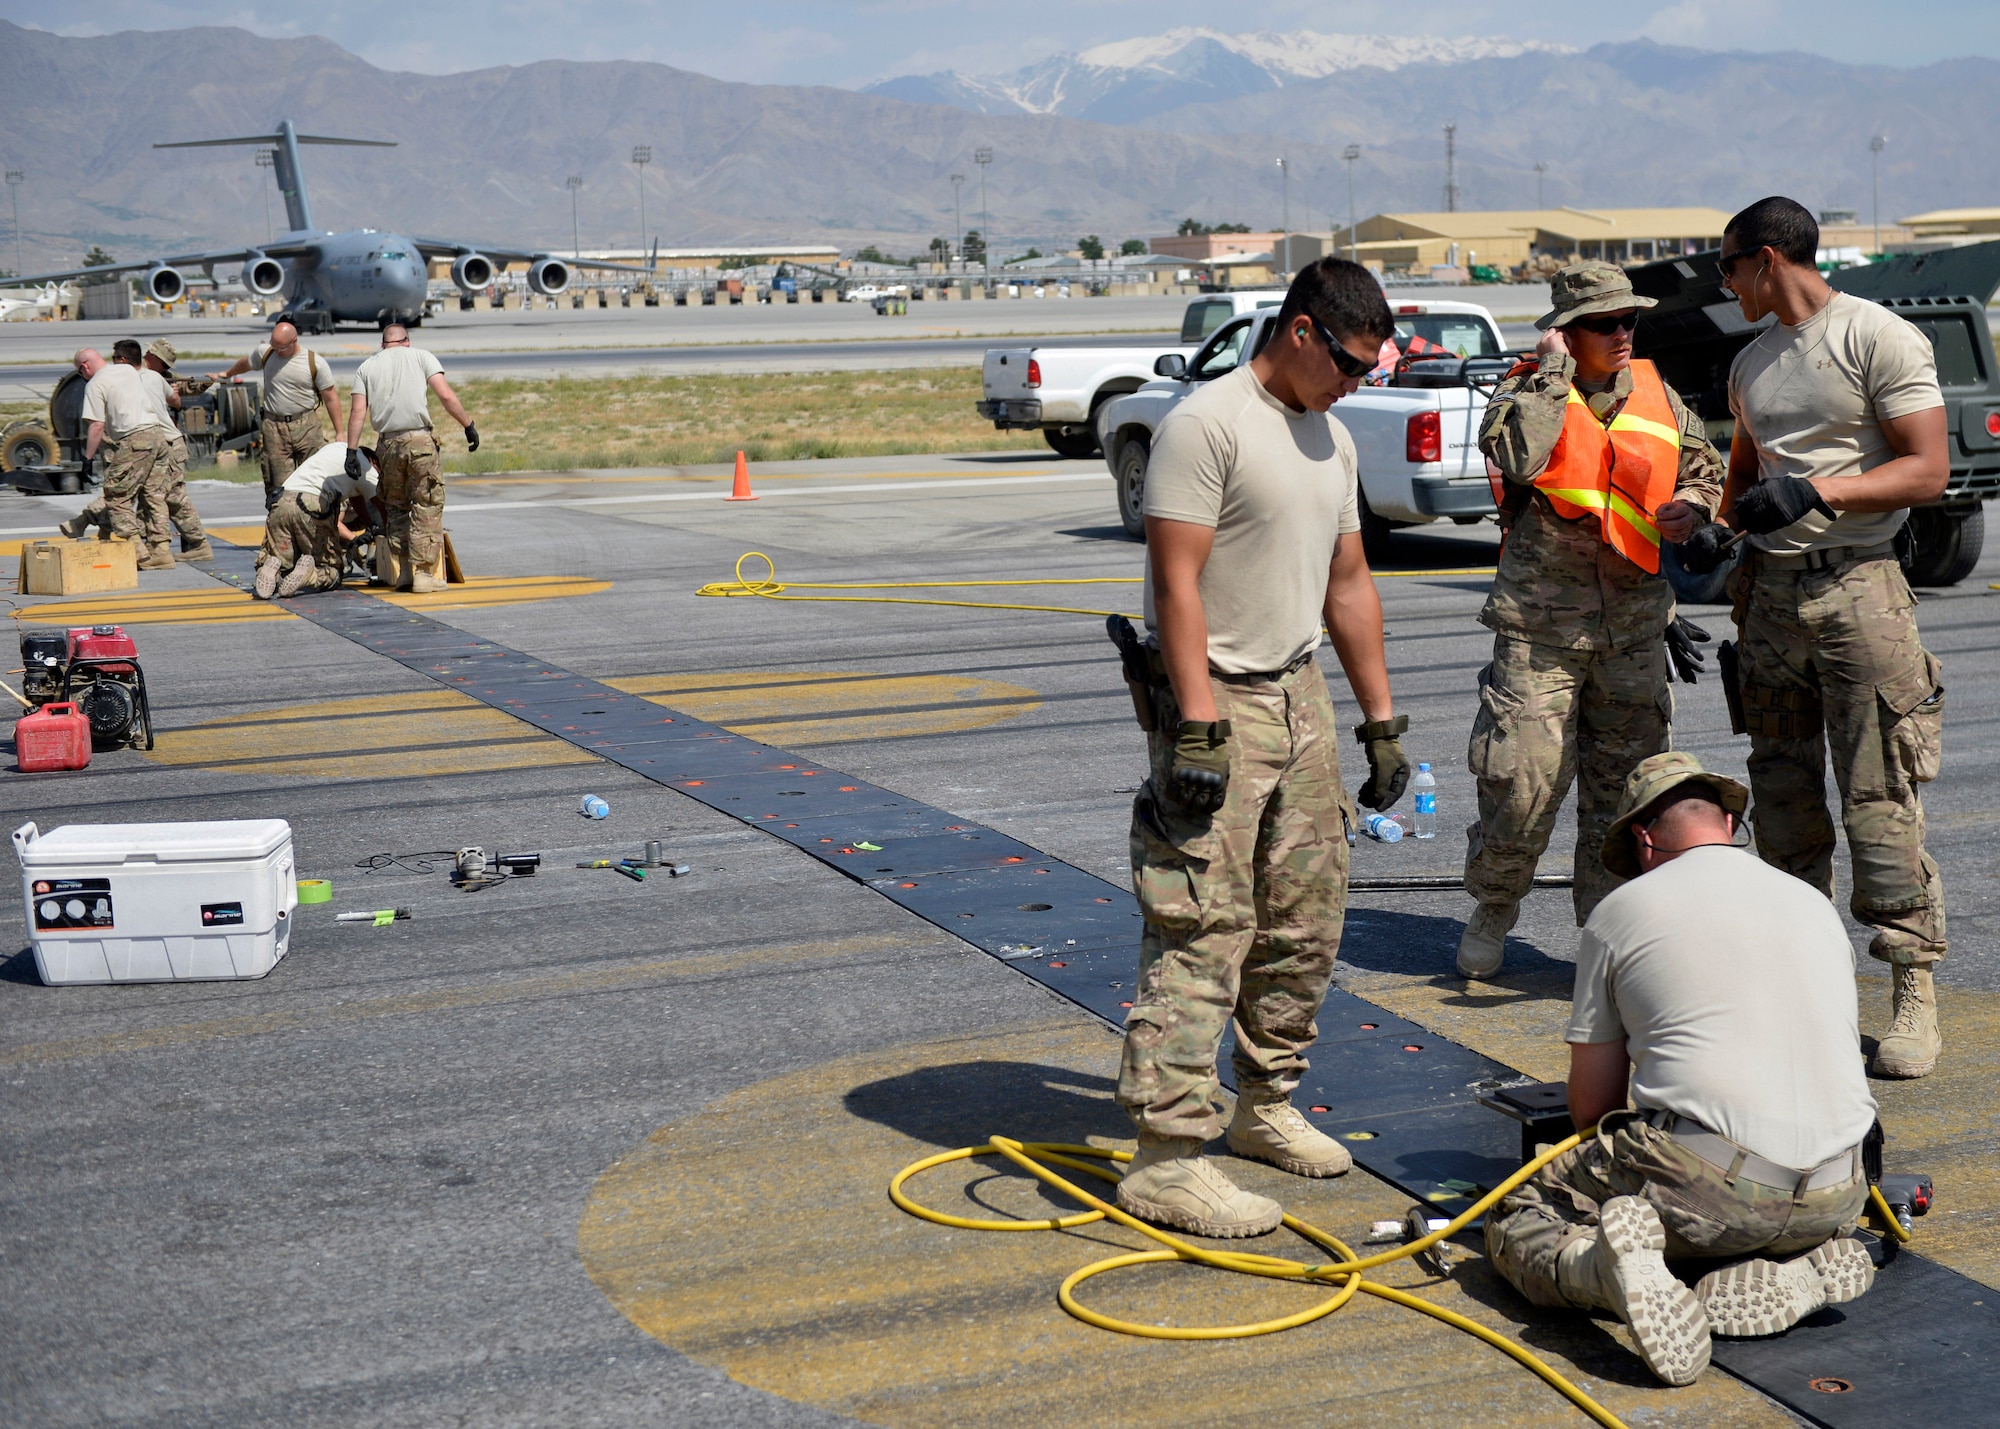 U.S. Air Force Airmen with the 455th Expeditionary Civil Engineer Squadron, grind down bolts on a polly pad on the flightline at Bagram Airfield, Afghanistan June 5, 2014. Grinding down the bolts is necessary to prevent aircraft from popping tires when running over the polly pad. (U.S. Air Force photo by Staff Sgt. Evelyn Chavez/Released)